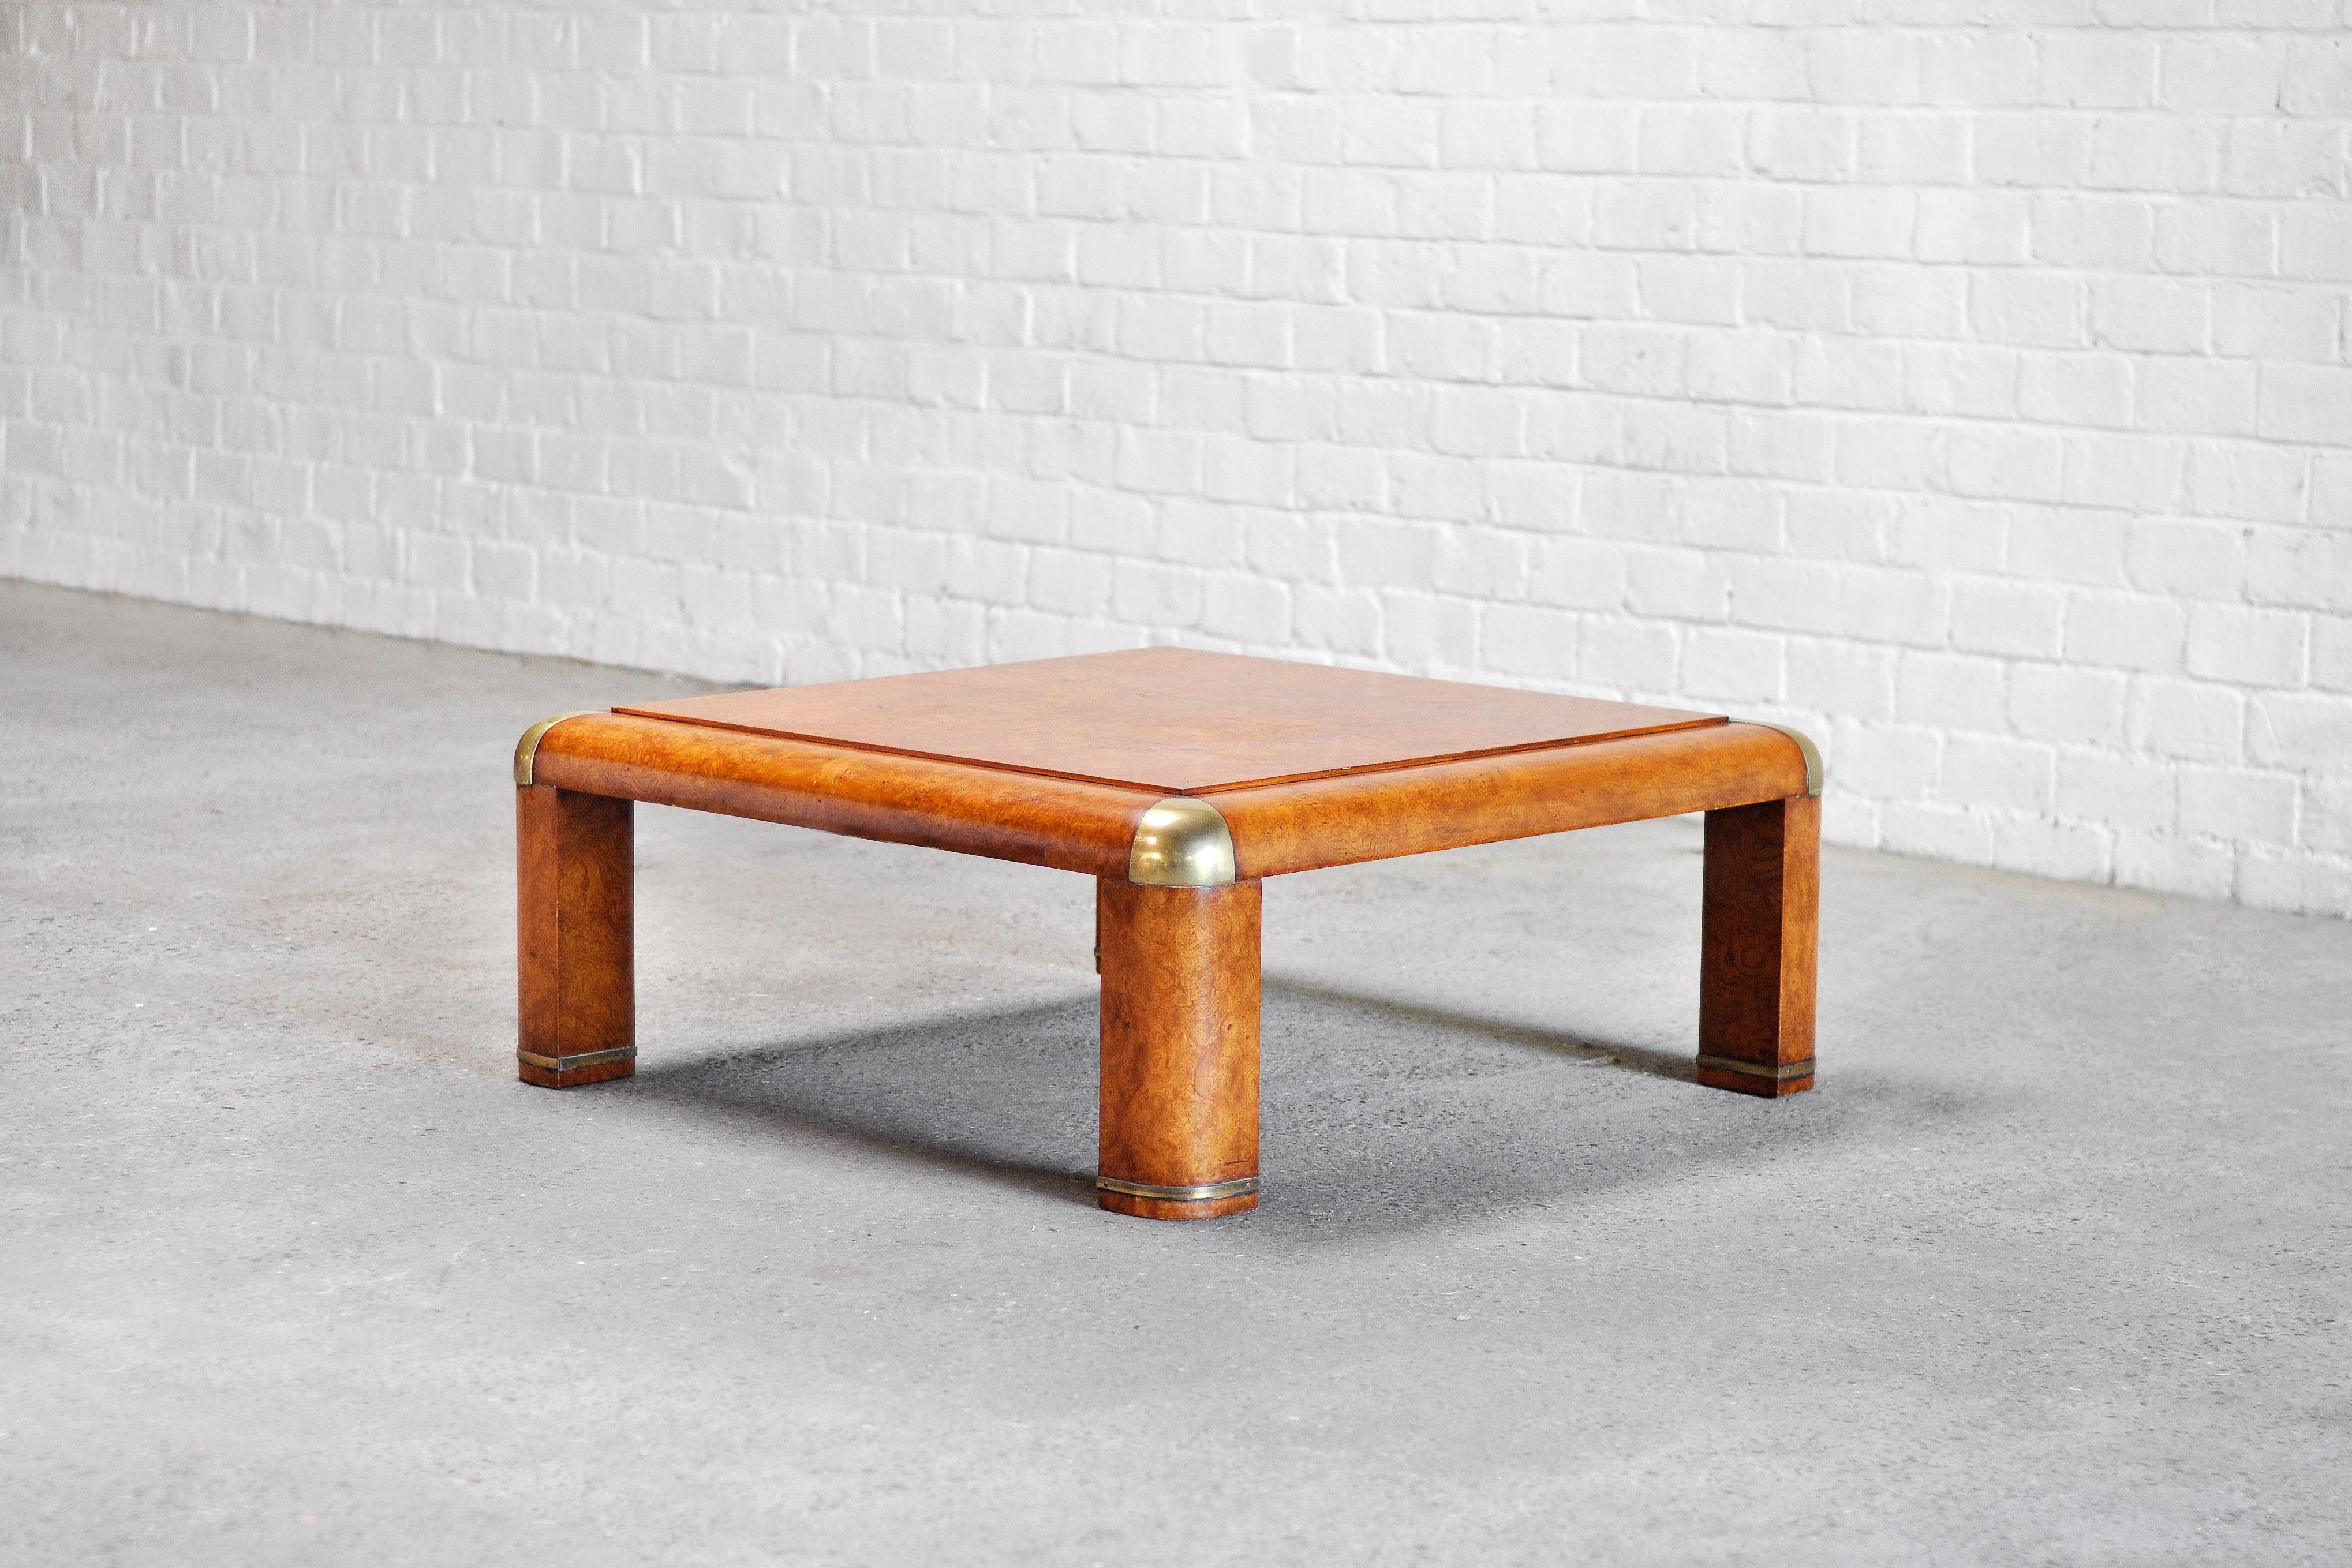 American Burl Wood & Brass Coffee Table By Karl Springer, 1970's For Sale